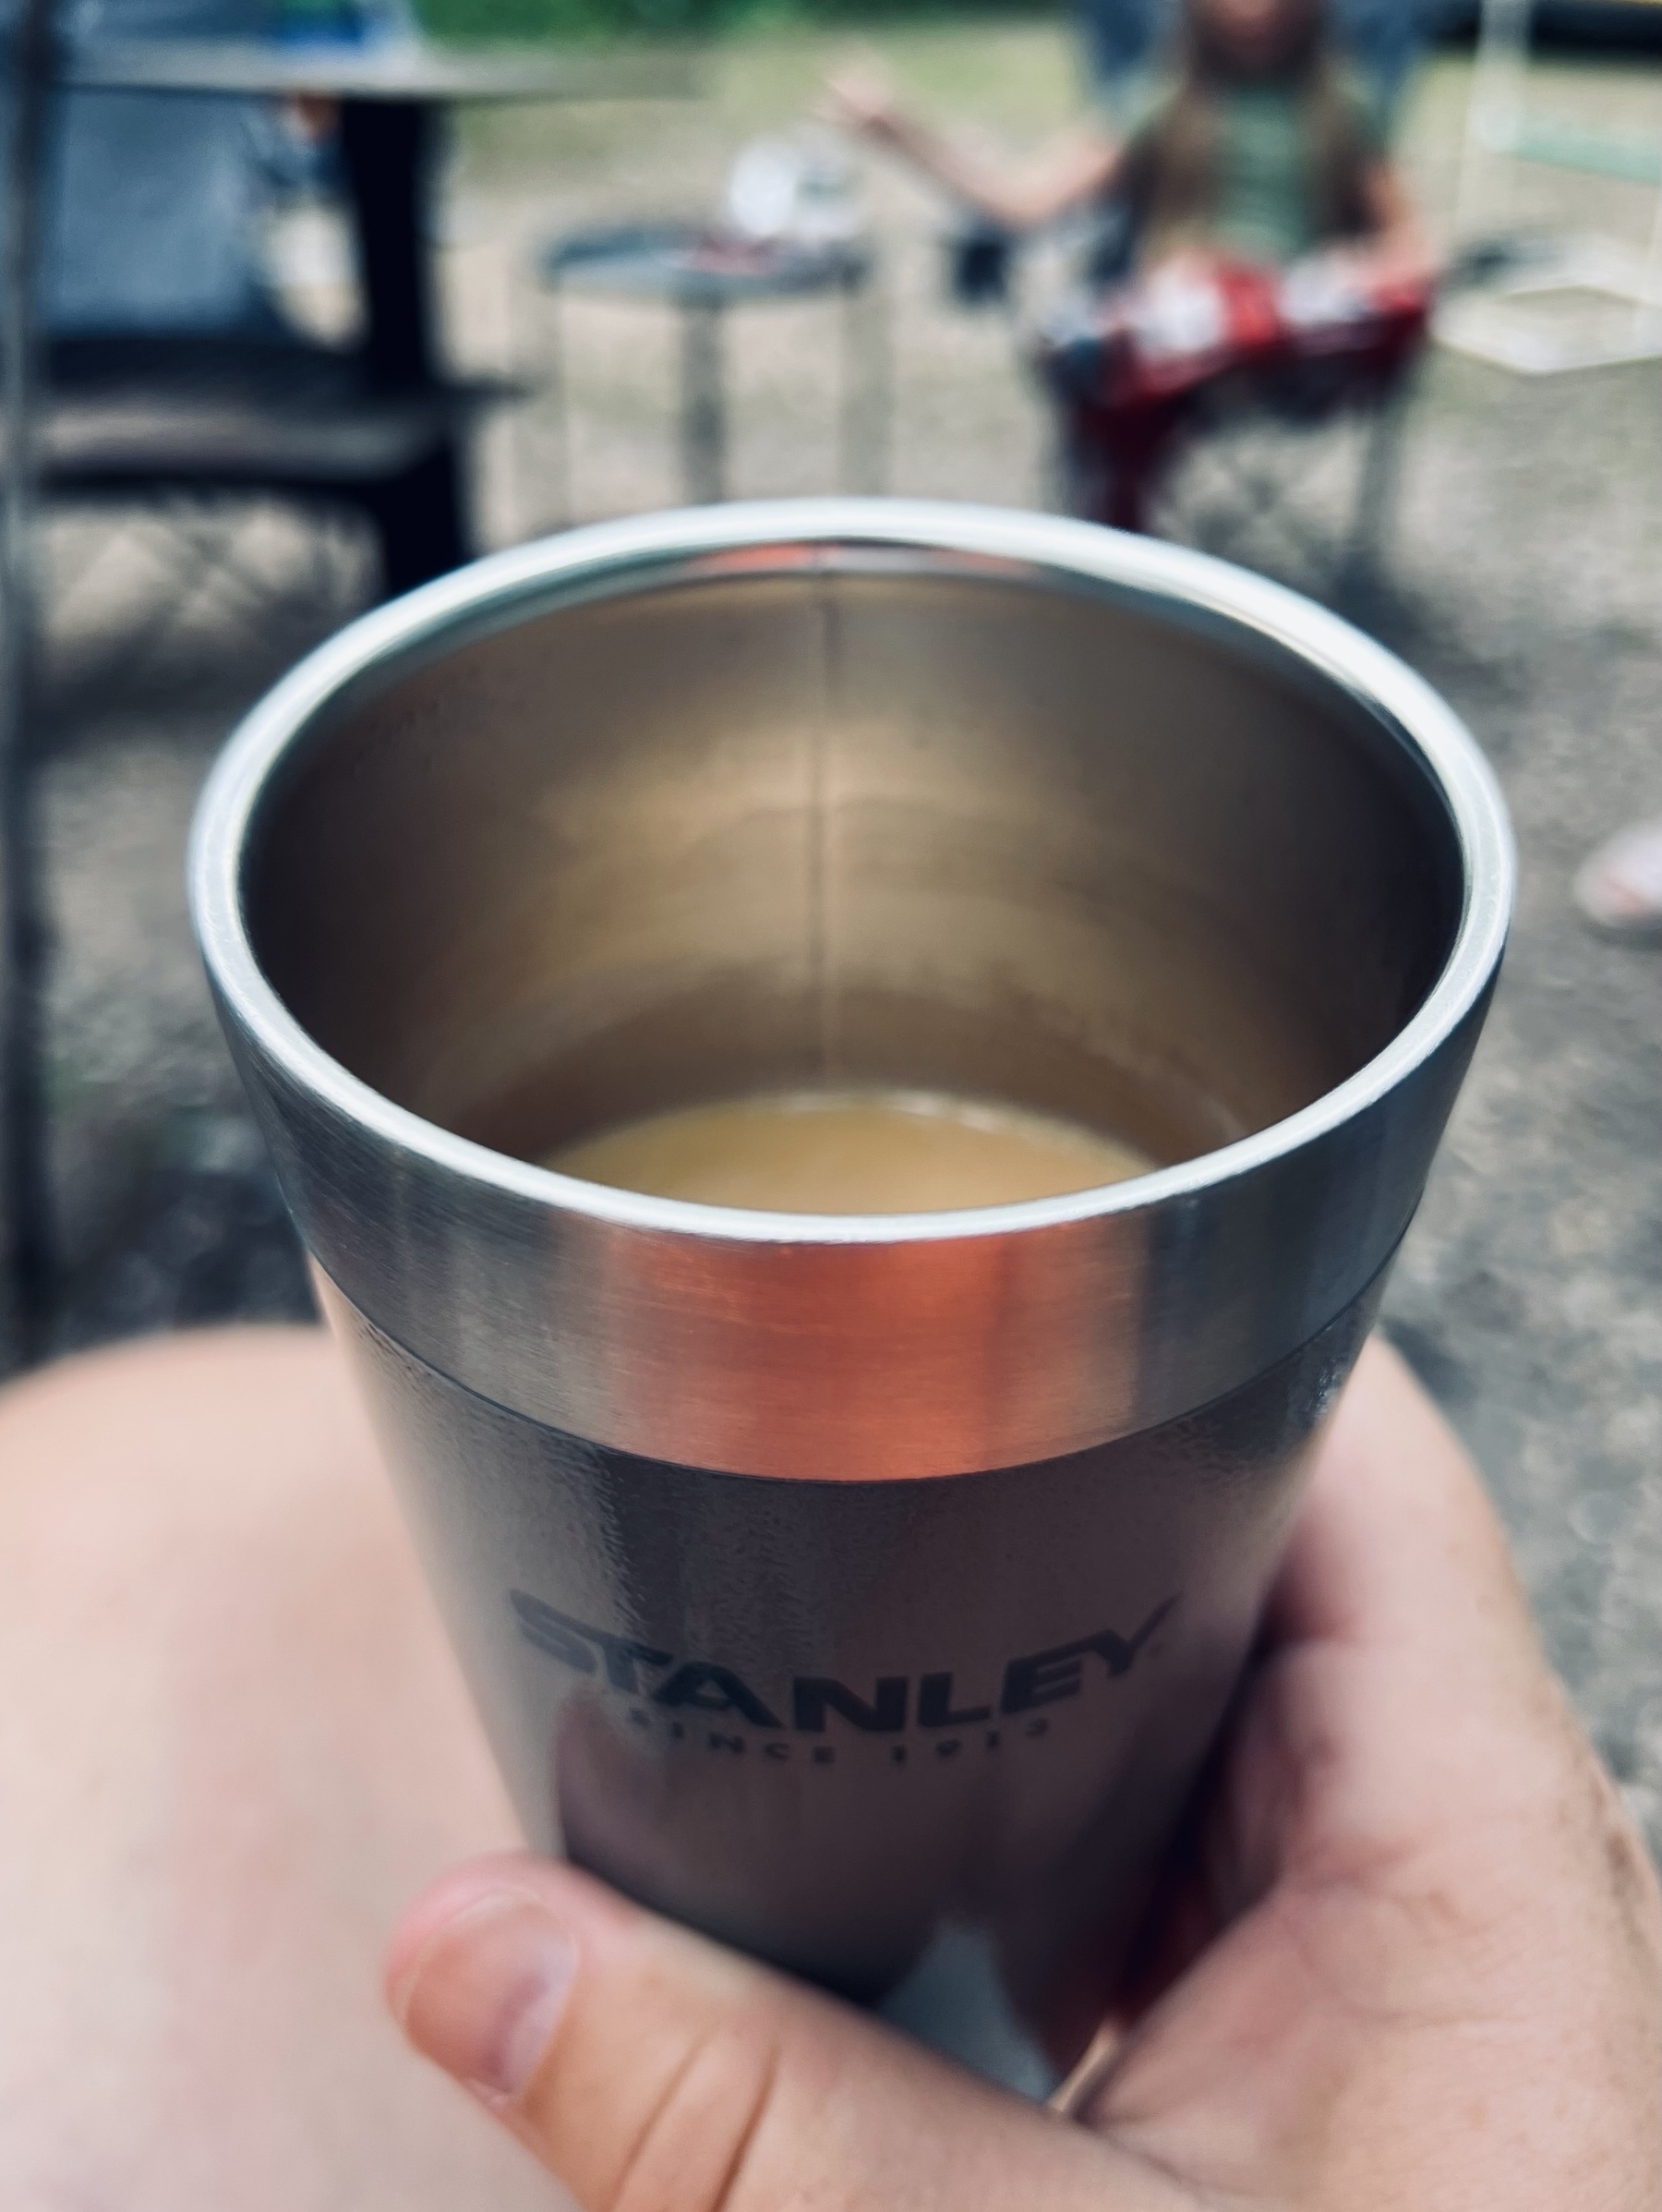 A coffee mug half filled with coffee is in a man’s hand. The coffee mug has a STANLEY branding printed on the side. 